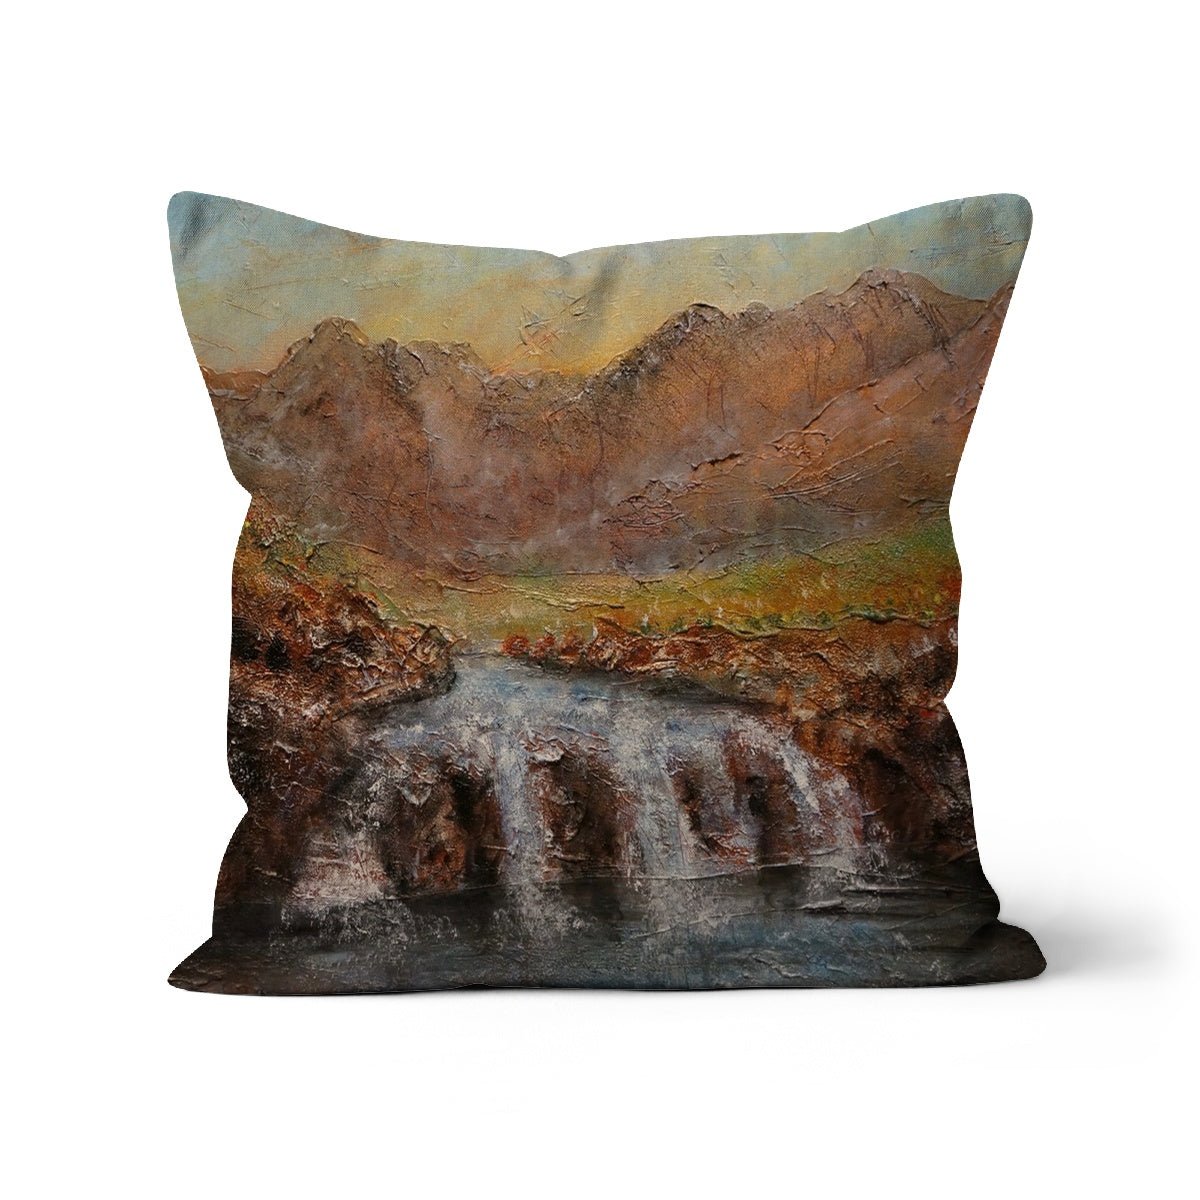 Fairy Pools Dawn Skye Art Gifts Cushion-Cushions-Skye Art Gallery-Faux Suede-18"x18"-Paintings, Prints, Homeware, Art Gifts From Scotland By Scottish Artist Kevin Hunter